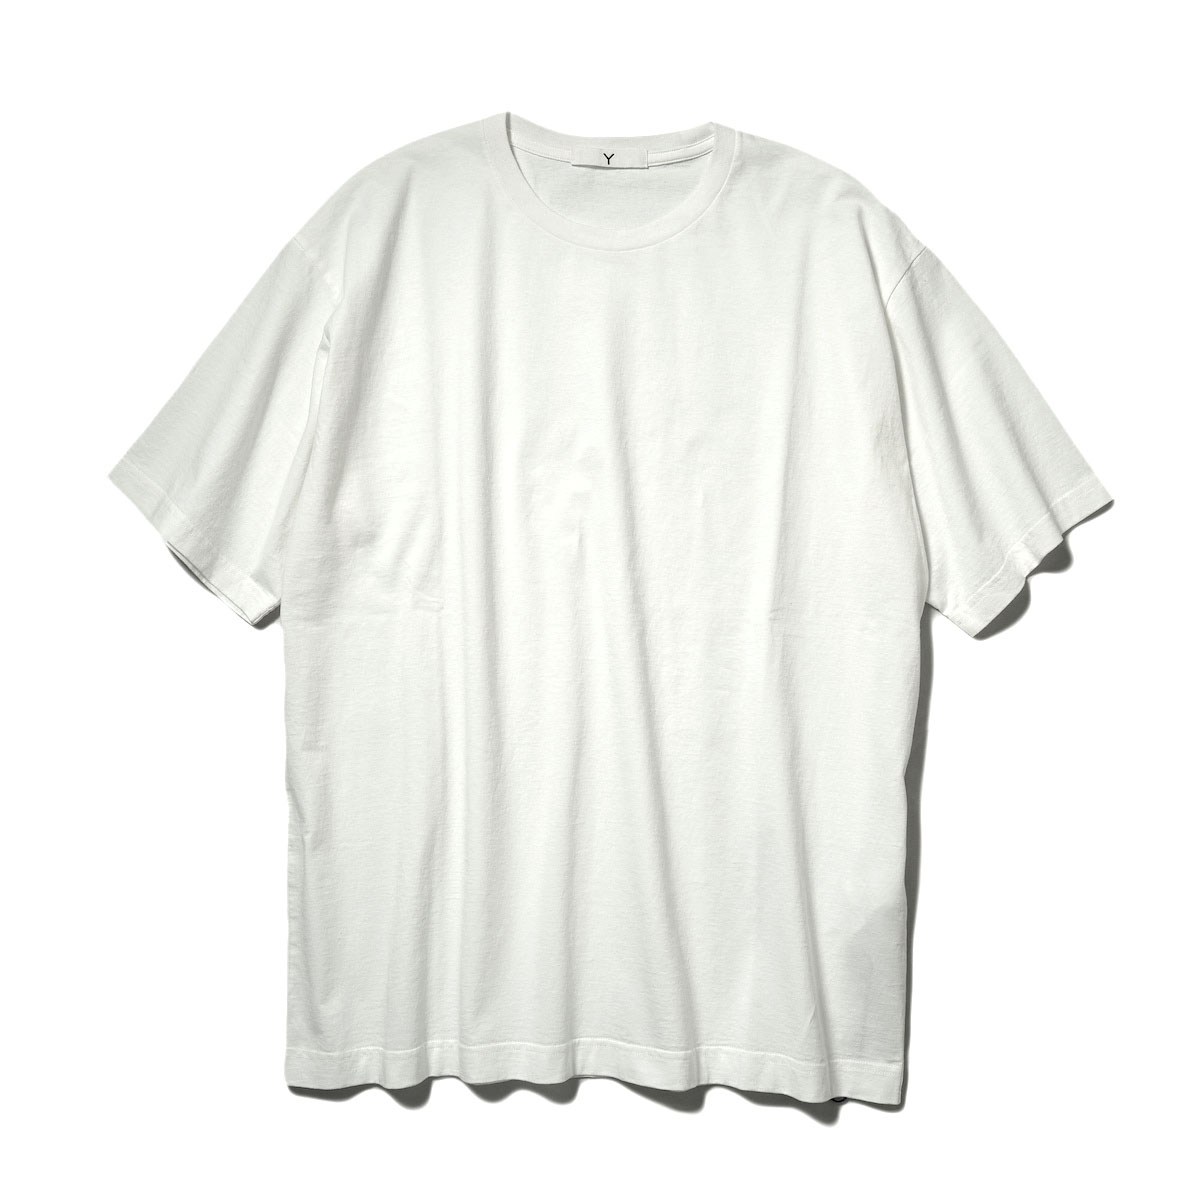 Y / ORGANIC COTTOM JERSEY S/S T (White)